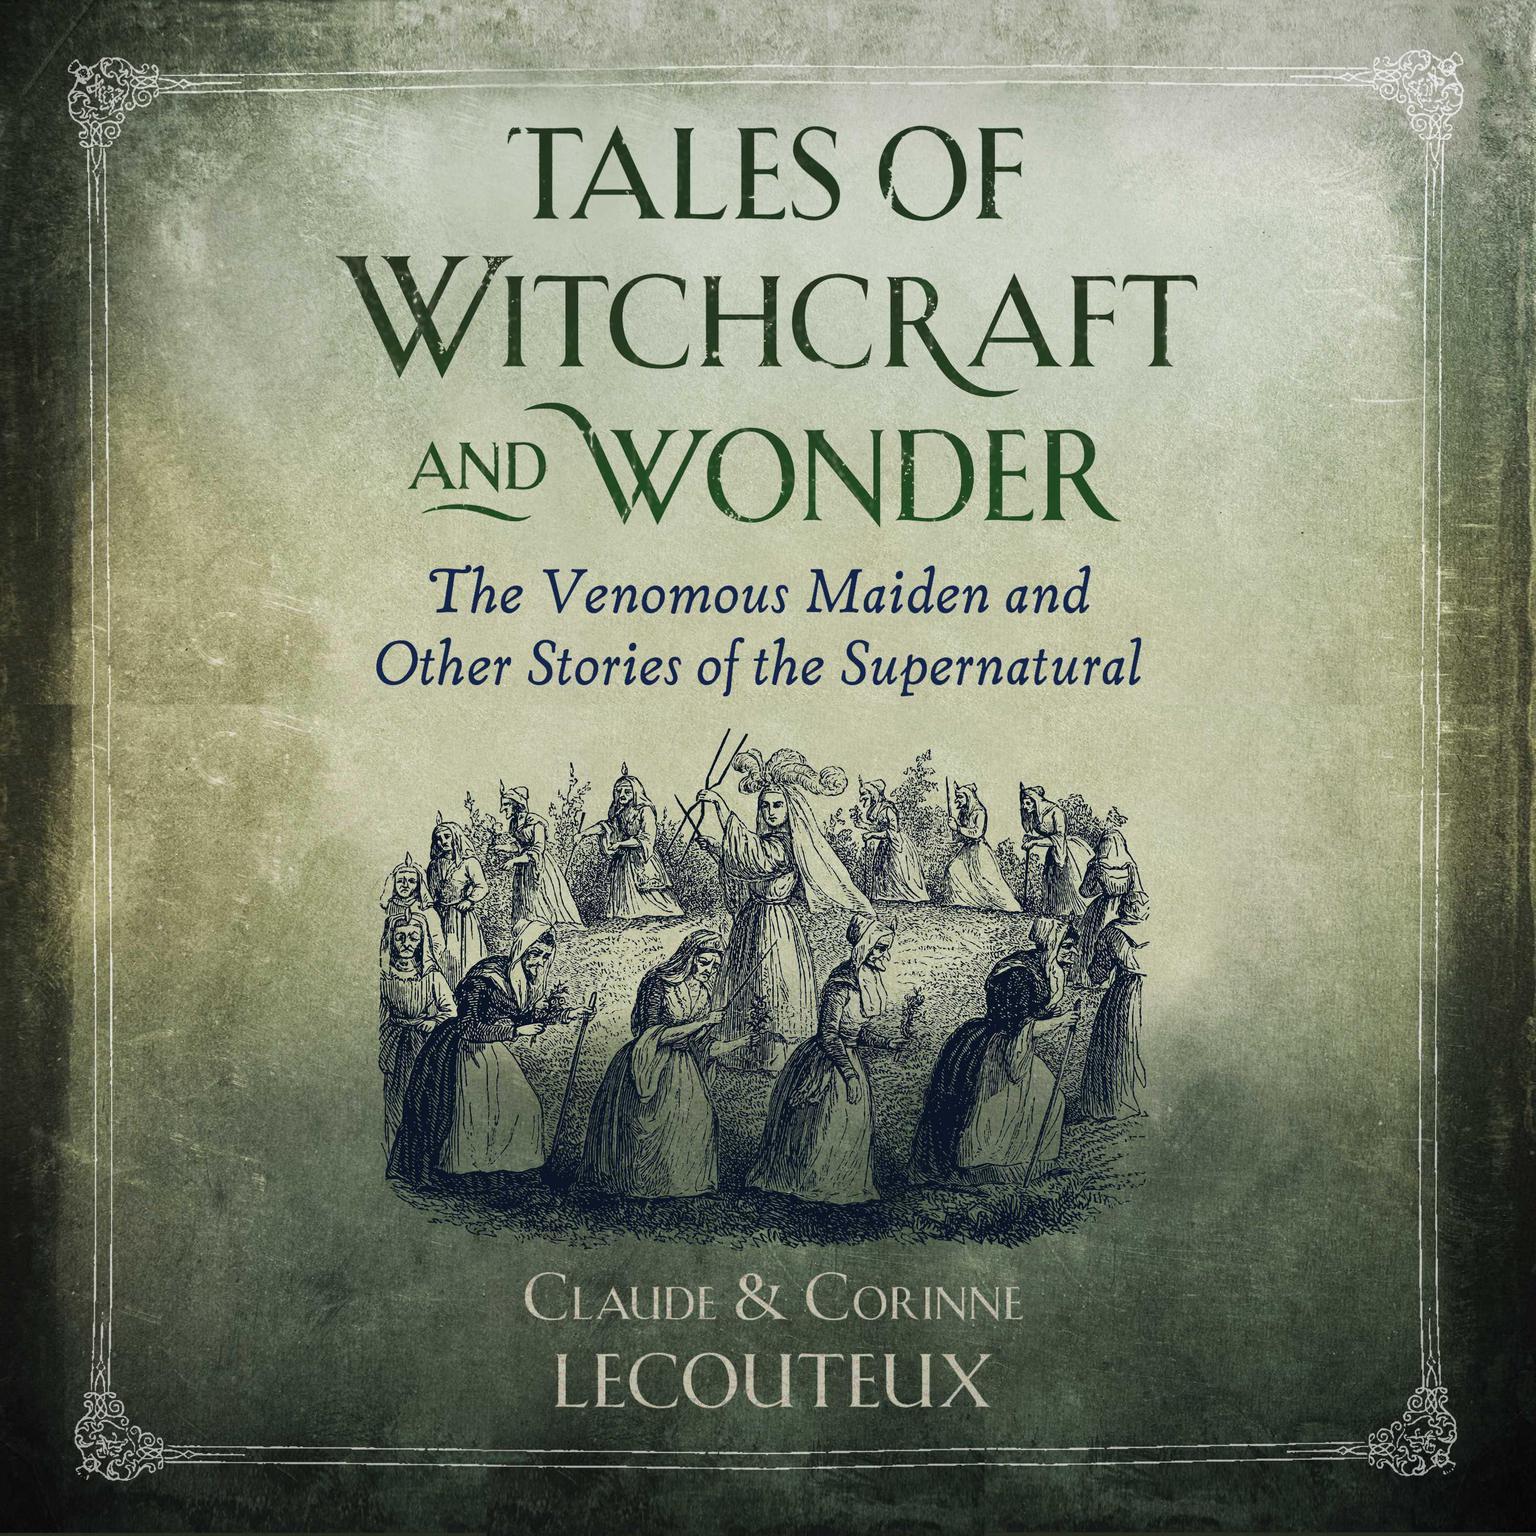 Tales of Witchcraft and Wonder: The Venomous Maiden and Other Stories of the Supernatural Audiobook, by Claude Lecouteux